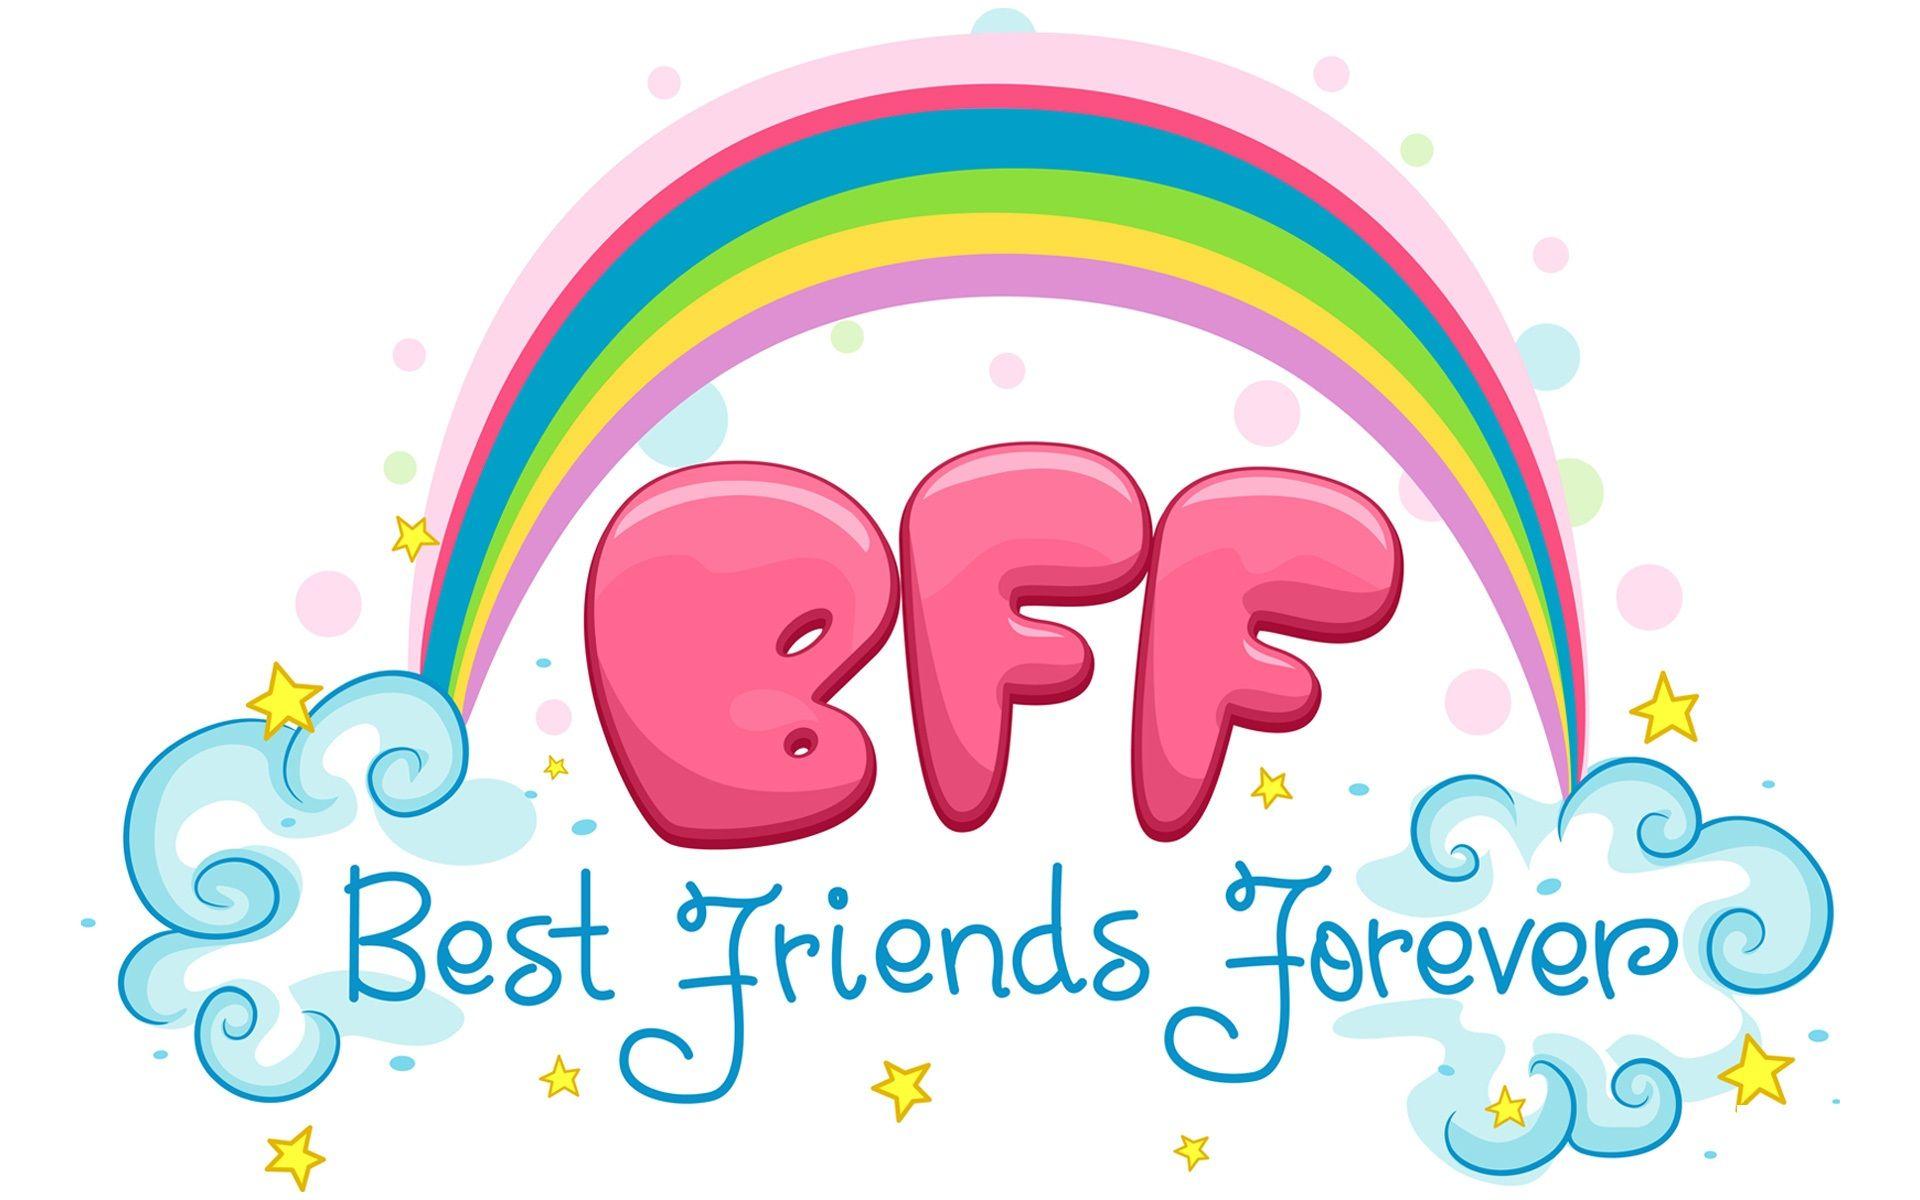 45 Best Friends Forever Images Photos Pictures Wallpapers Pics and GIF  for Whatsapp DP with Friendship Images